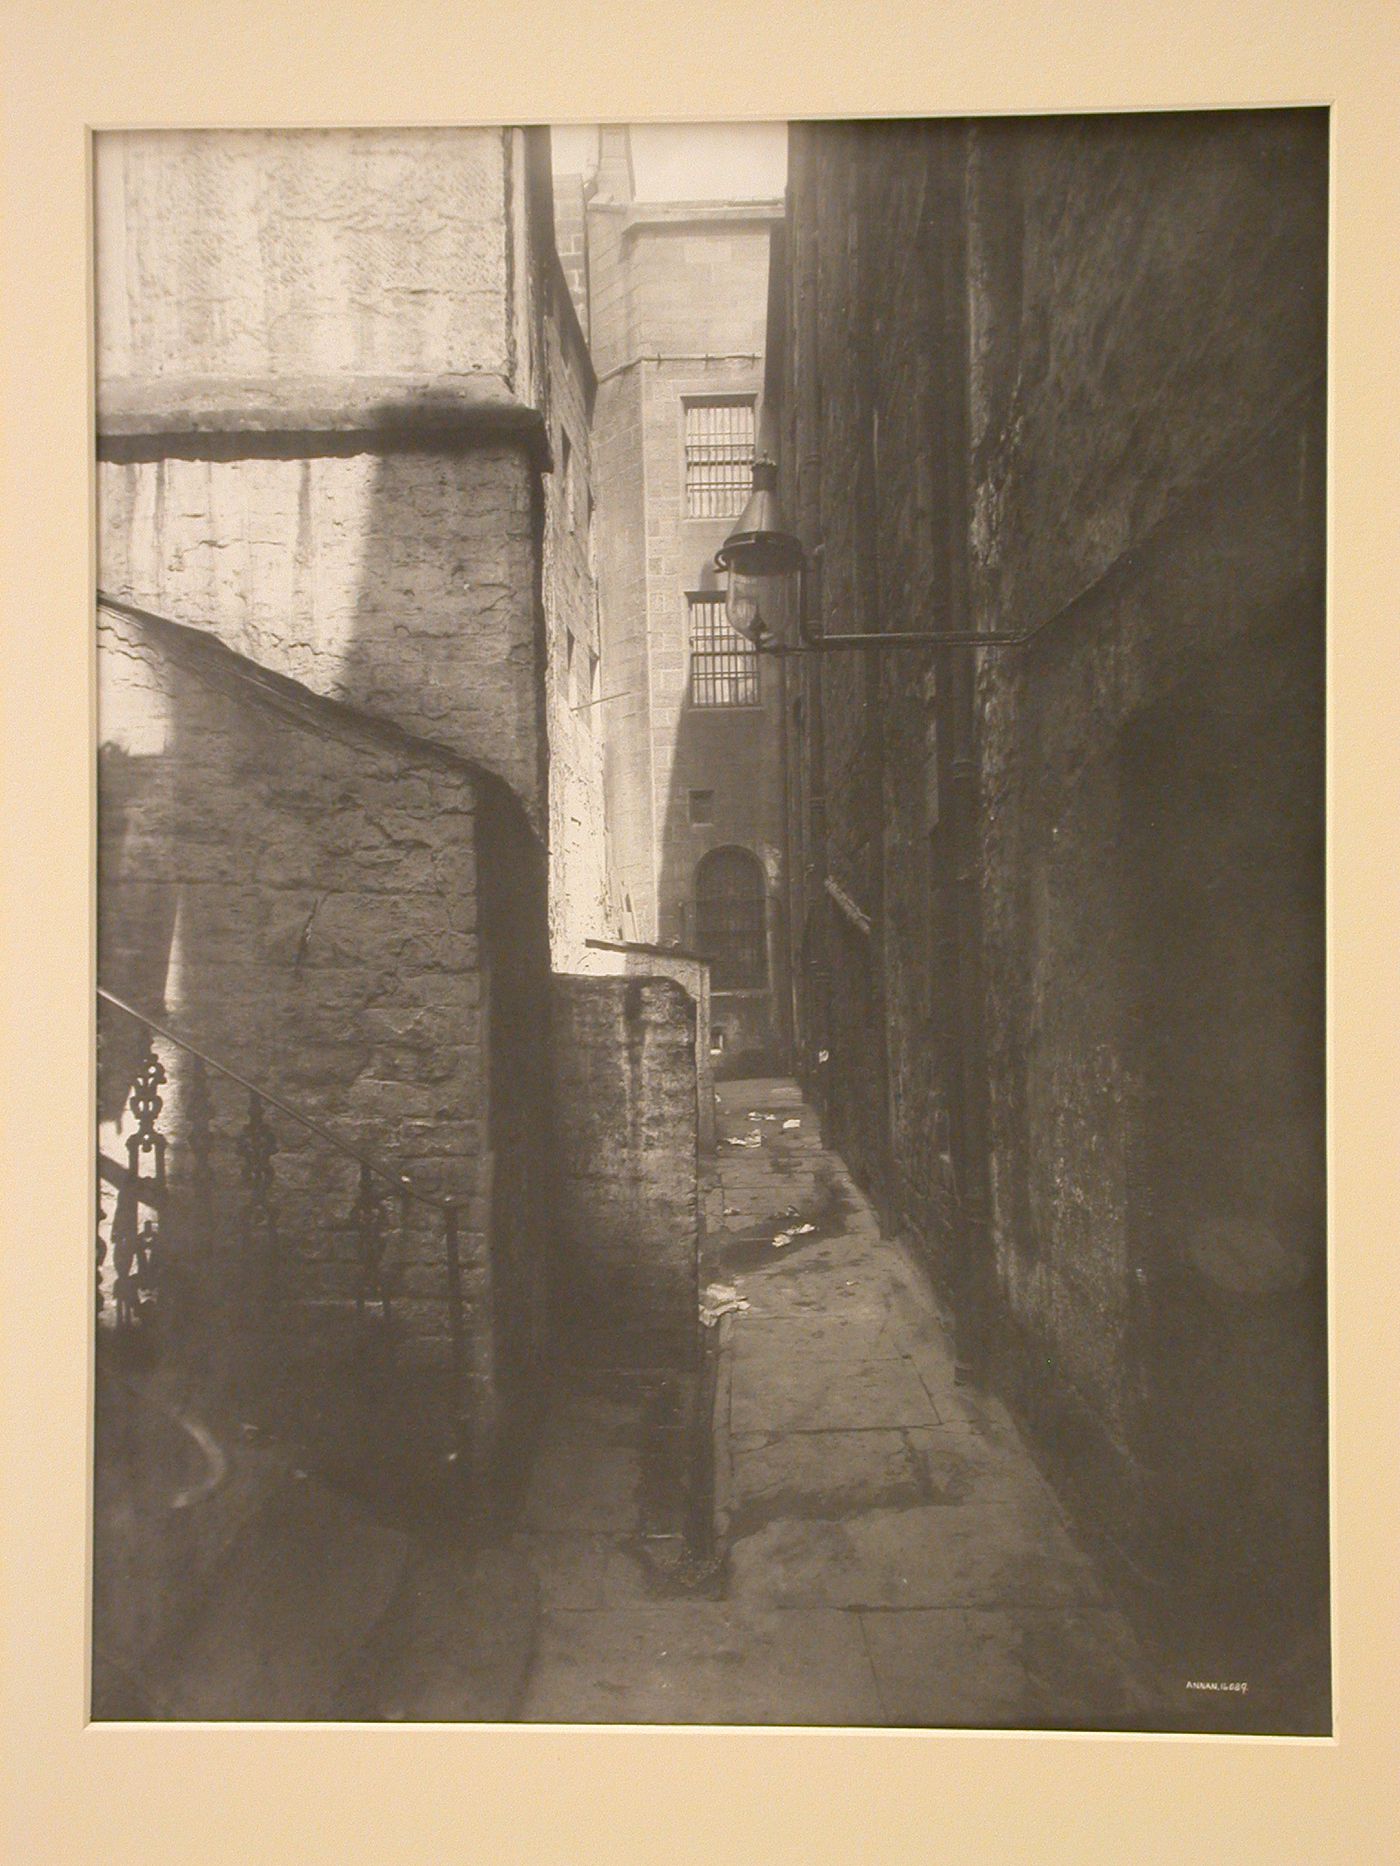 View of an alley with barred windows at the end, stairs at the left, and a gas lantern at the right, Glasgow, Scotland